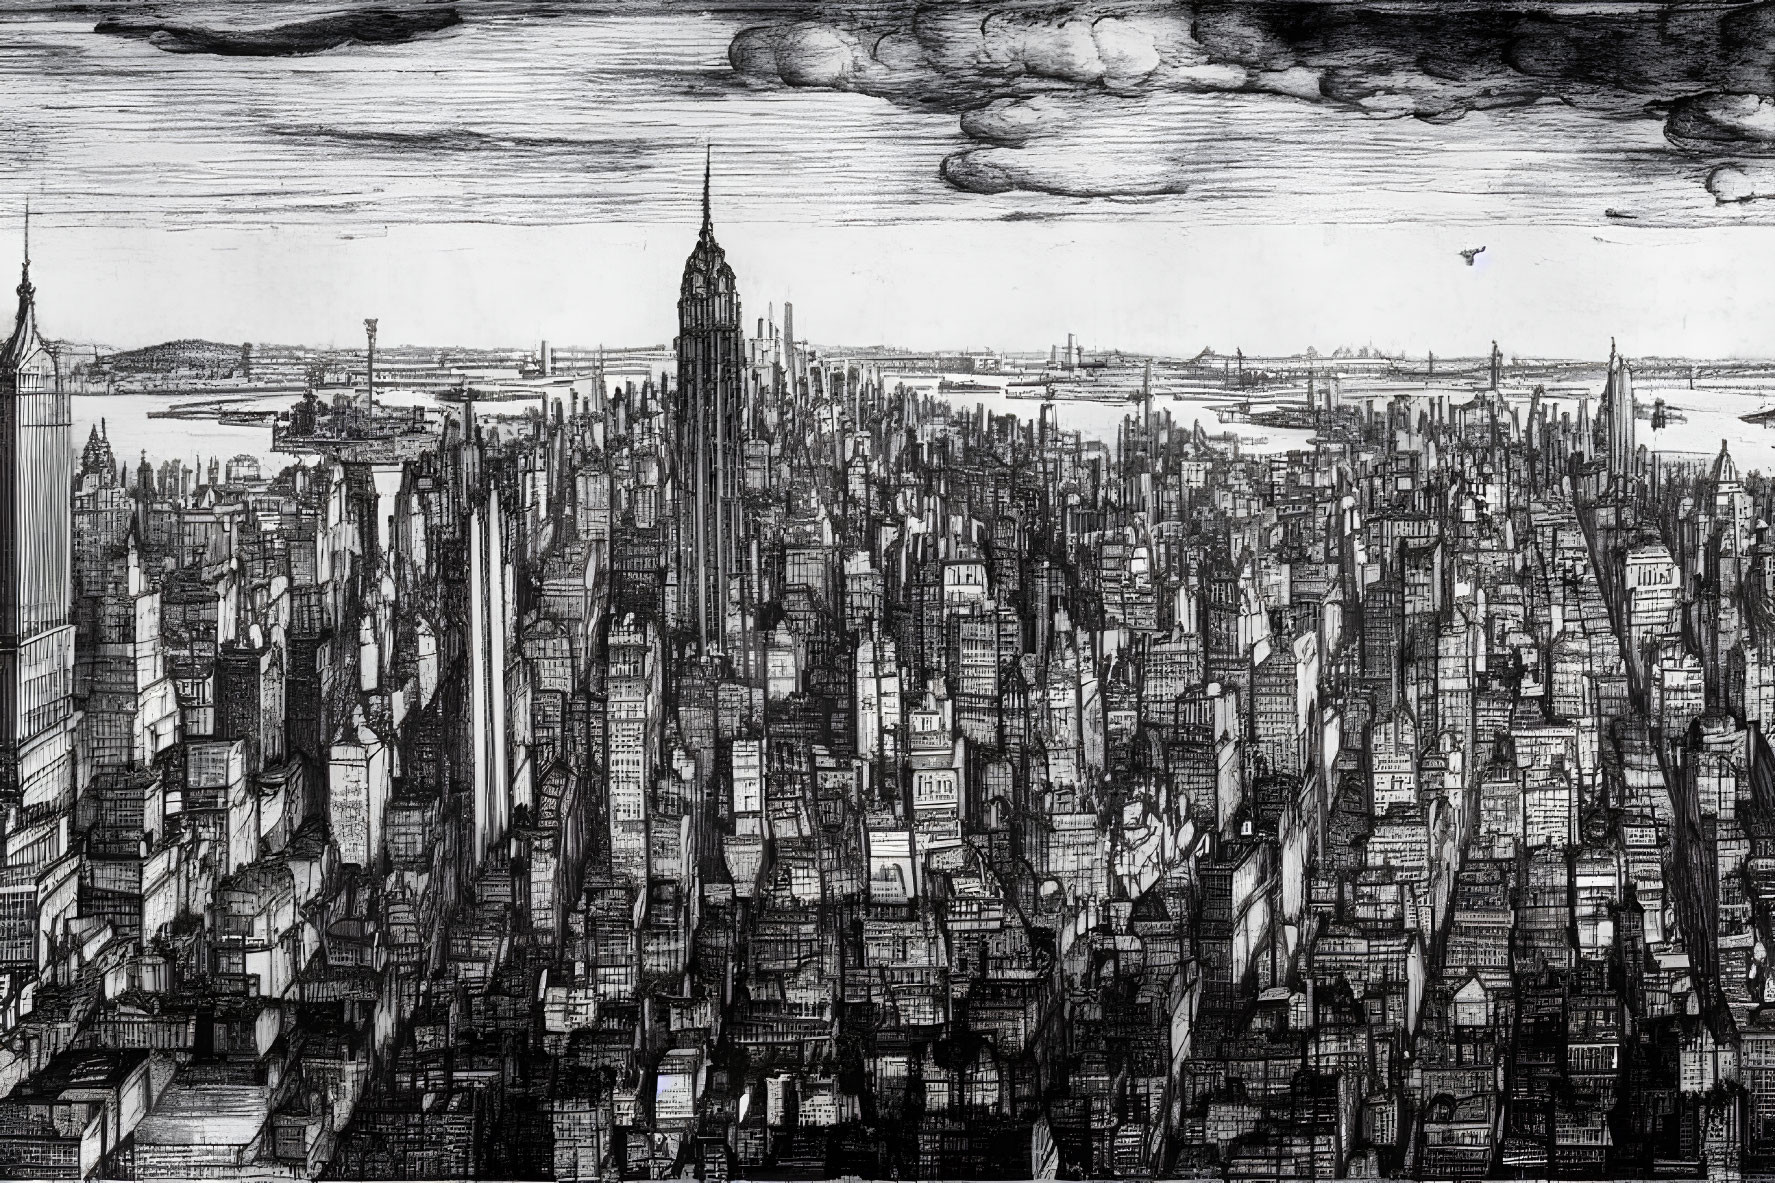 Monochromatic sketch of dense cityscape with high-rise buildings & central tower